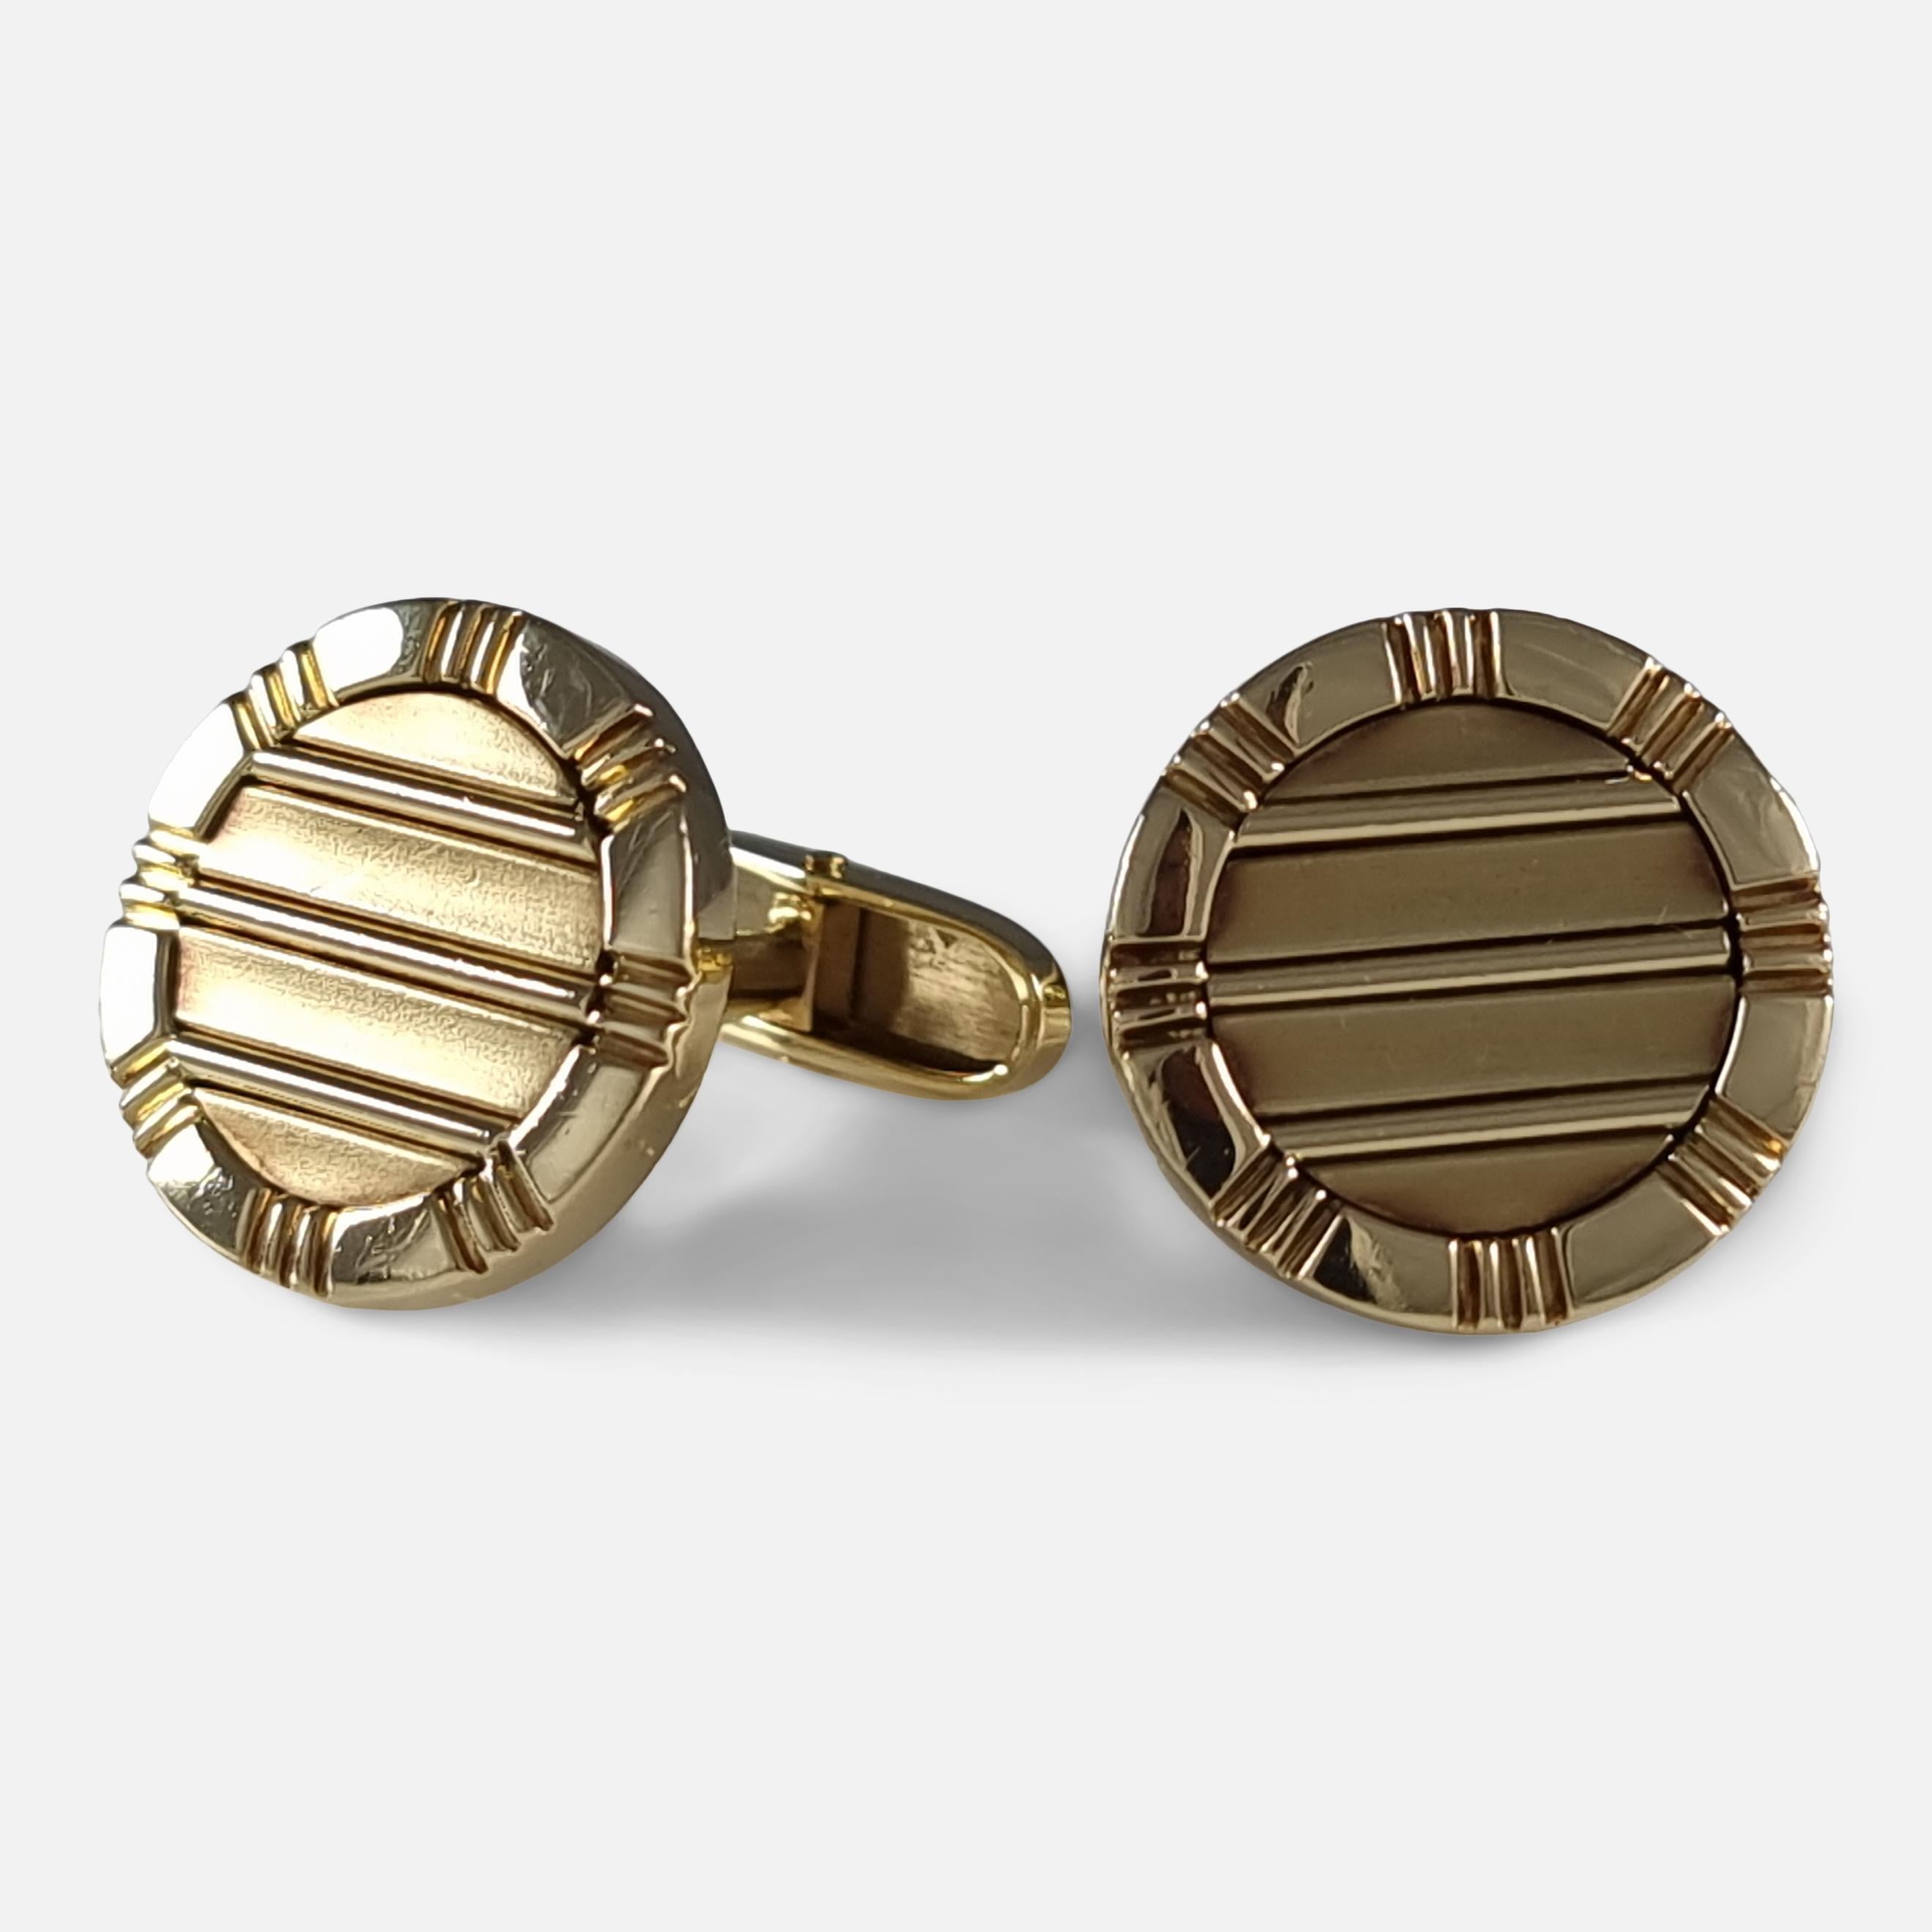 A set of 18ct yellow gold circular cufflinks by Asprey. The cufflinks are single-sided, with a circular reeded plaque design, and signed Asprey.

The cufflinks are hallmarked with the makers mark 'APLC', London import marks, 1994, and '750' to